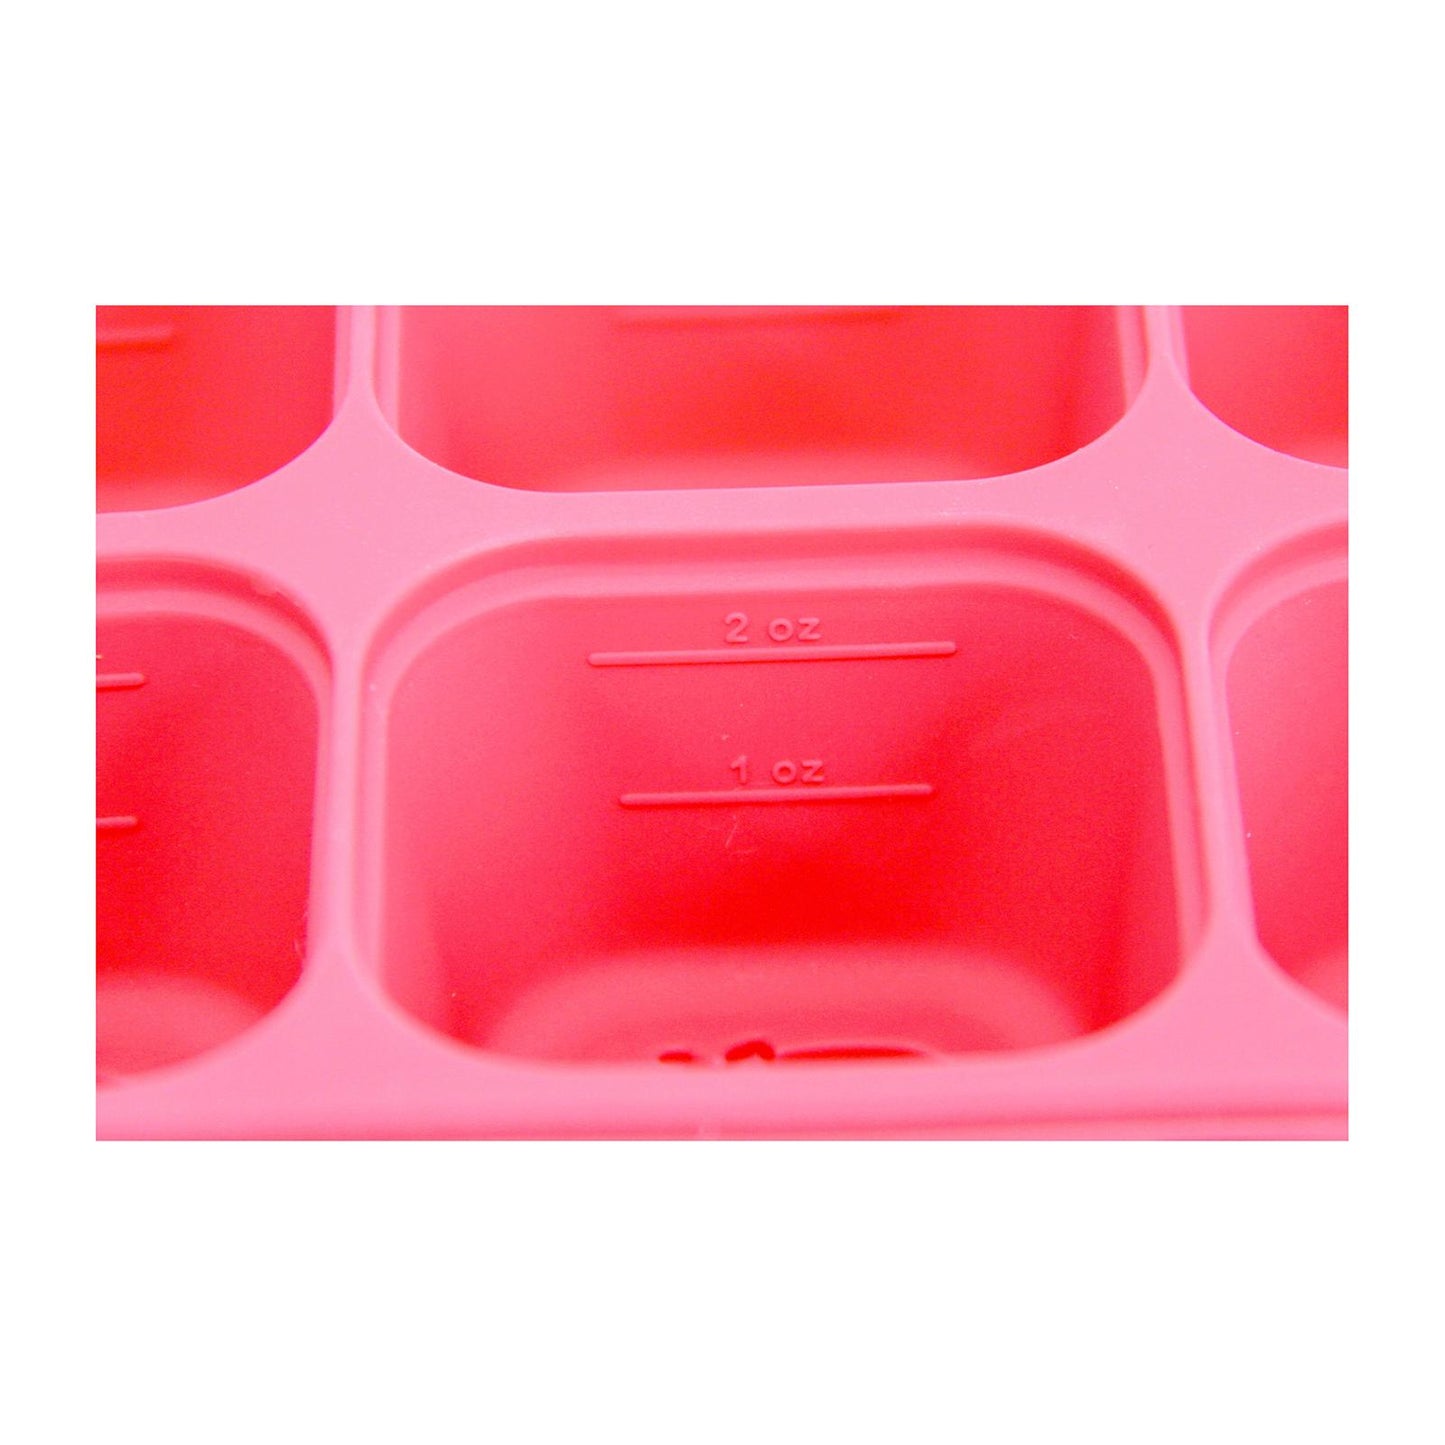 Marcus n Marcus - Food Cube Tray (Lion)